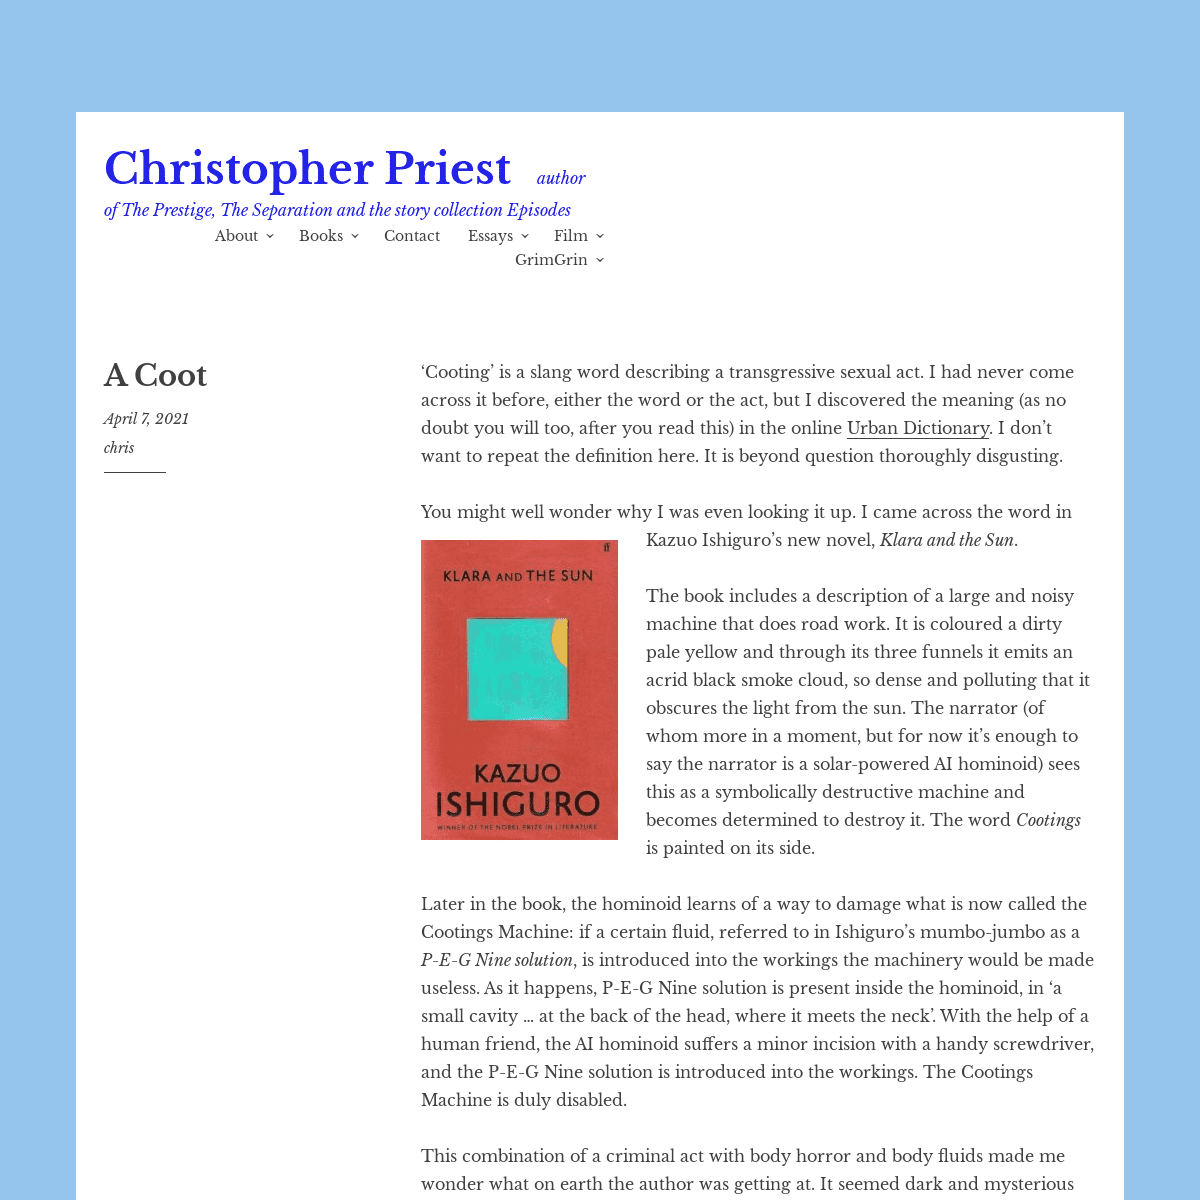 A complete backup of https://christopher-priest.co.uk